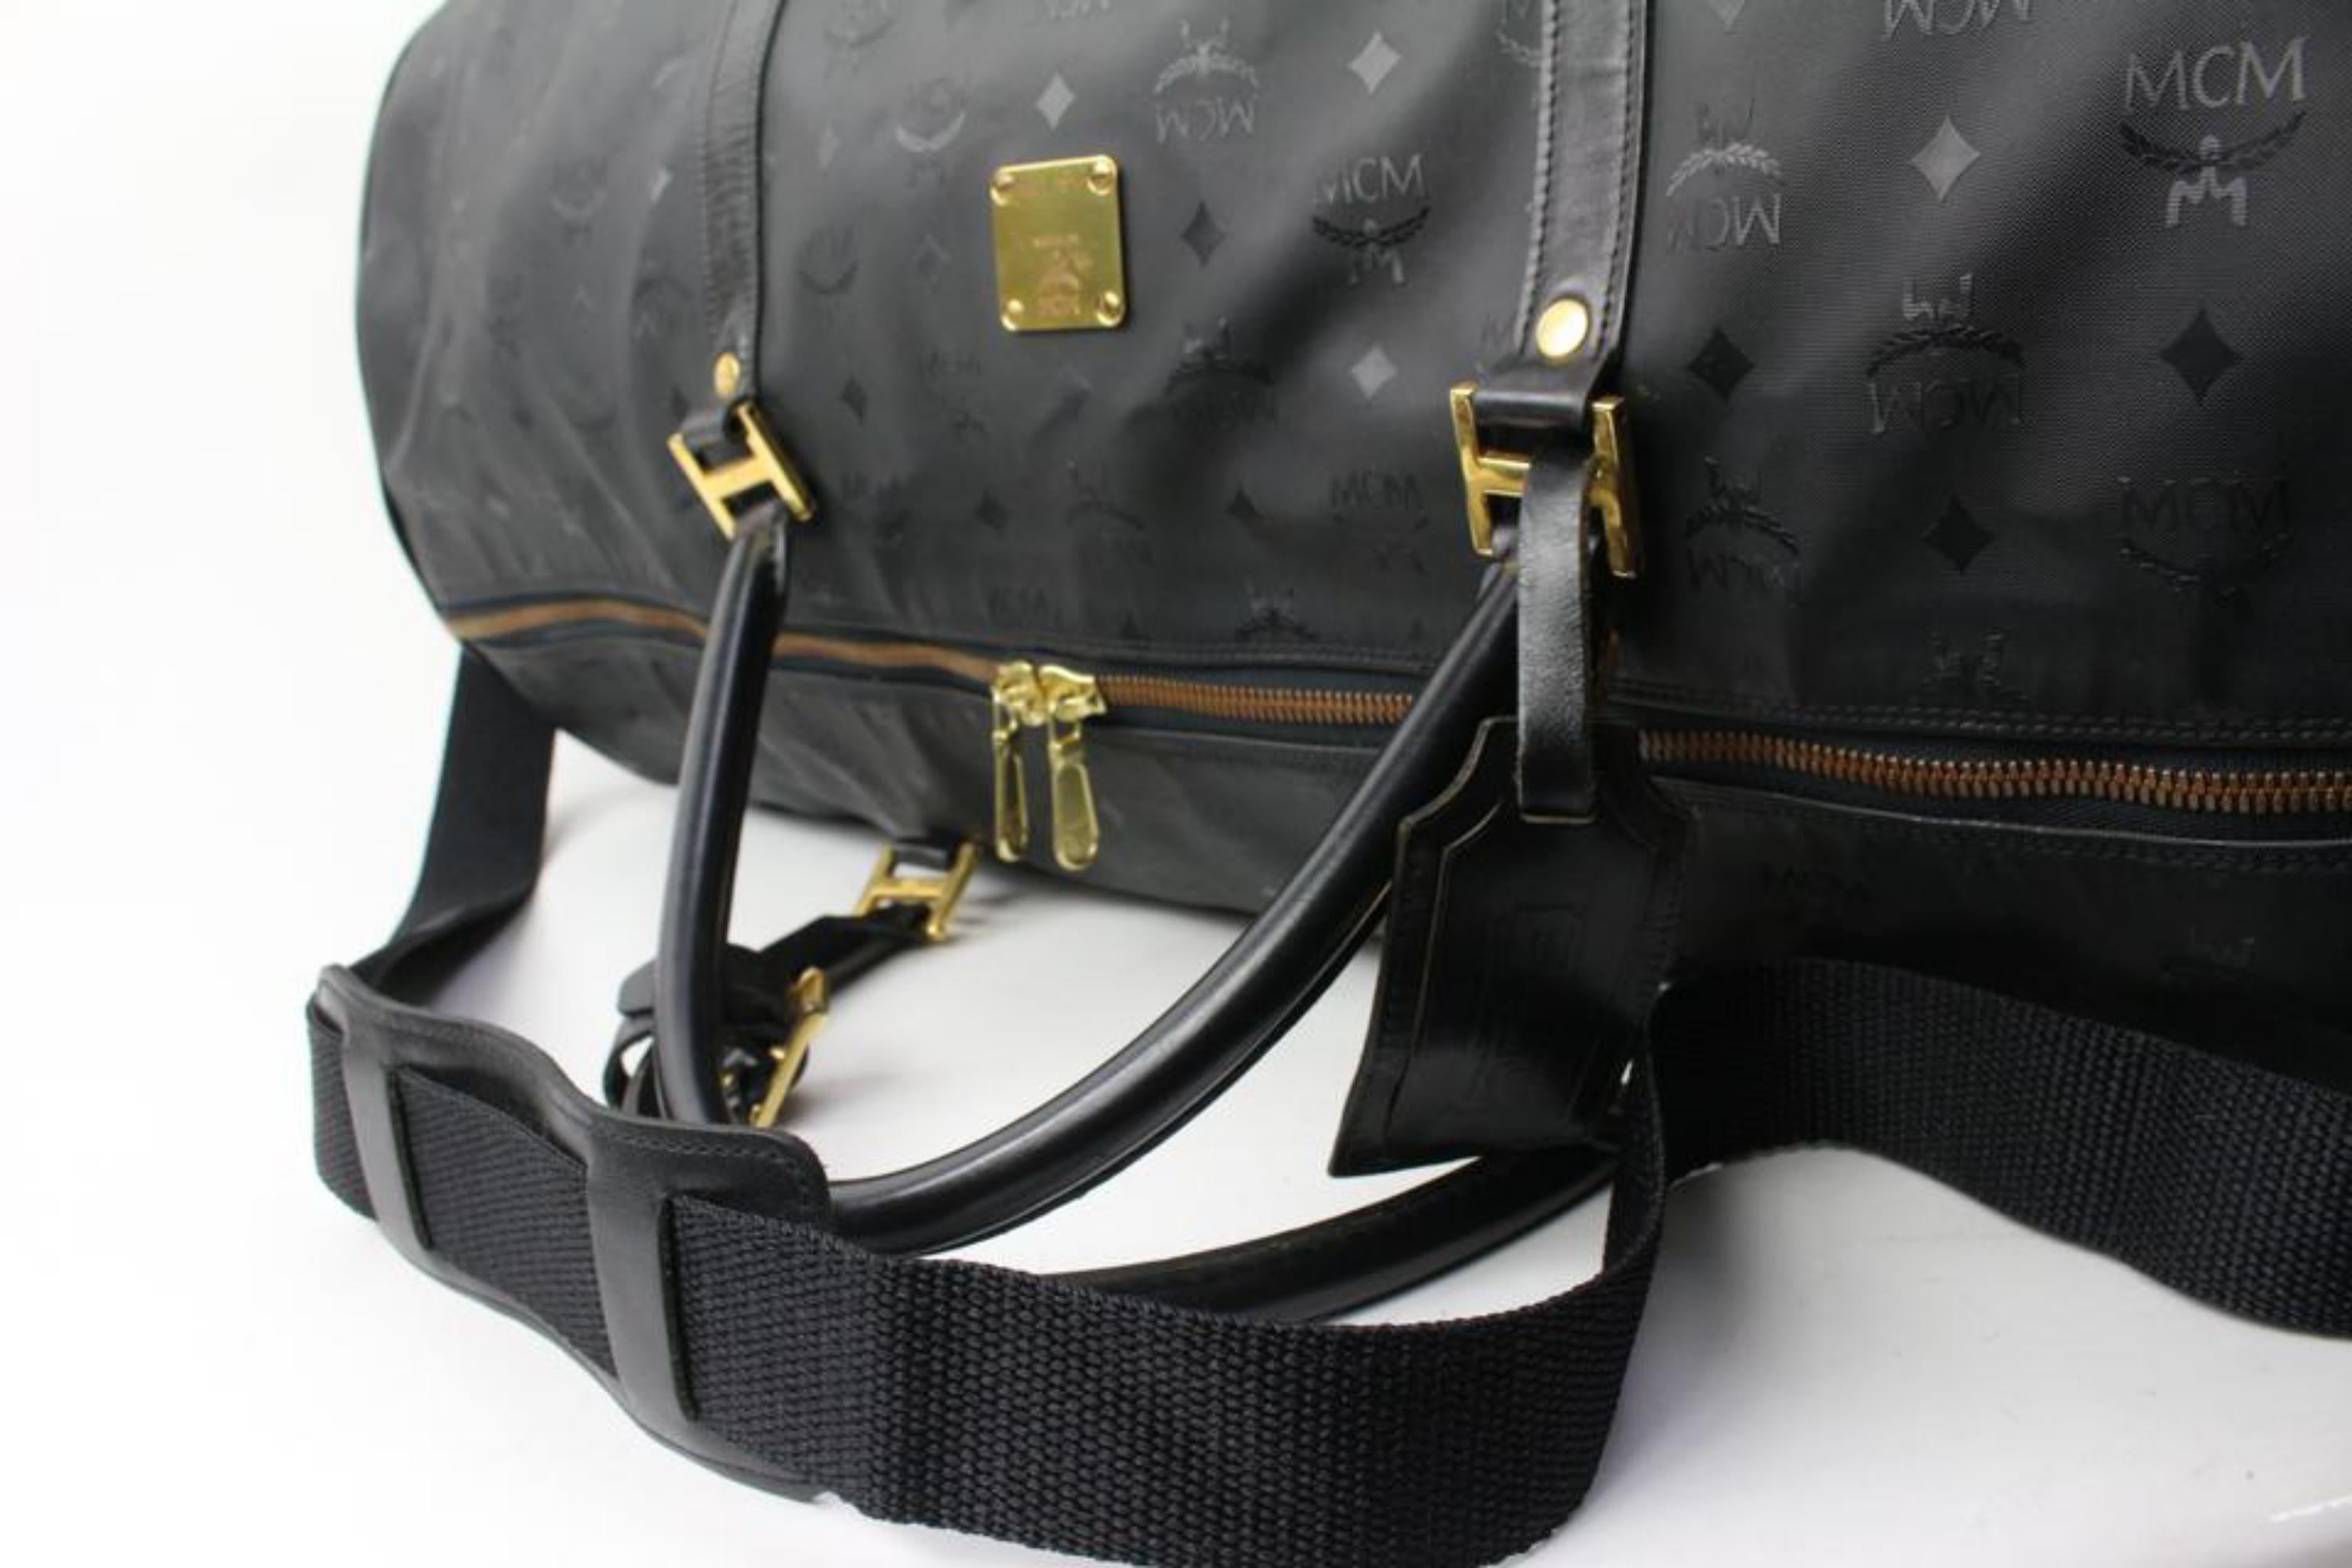 MCM XL Black Monogram Visetos Logo Boston Duffle Bag with Strap 121m47 In Excellent Condition In Dix hills, NY